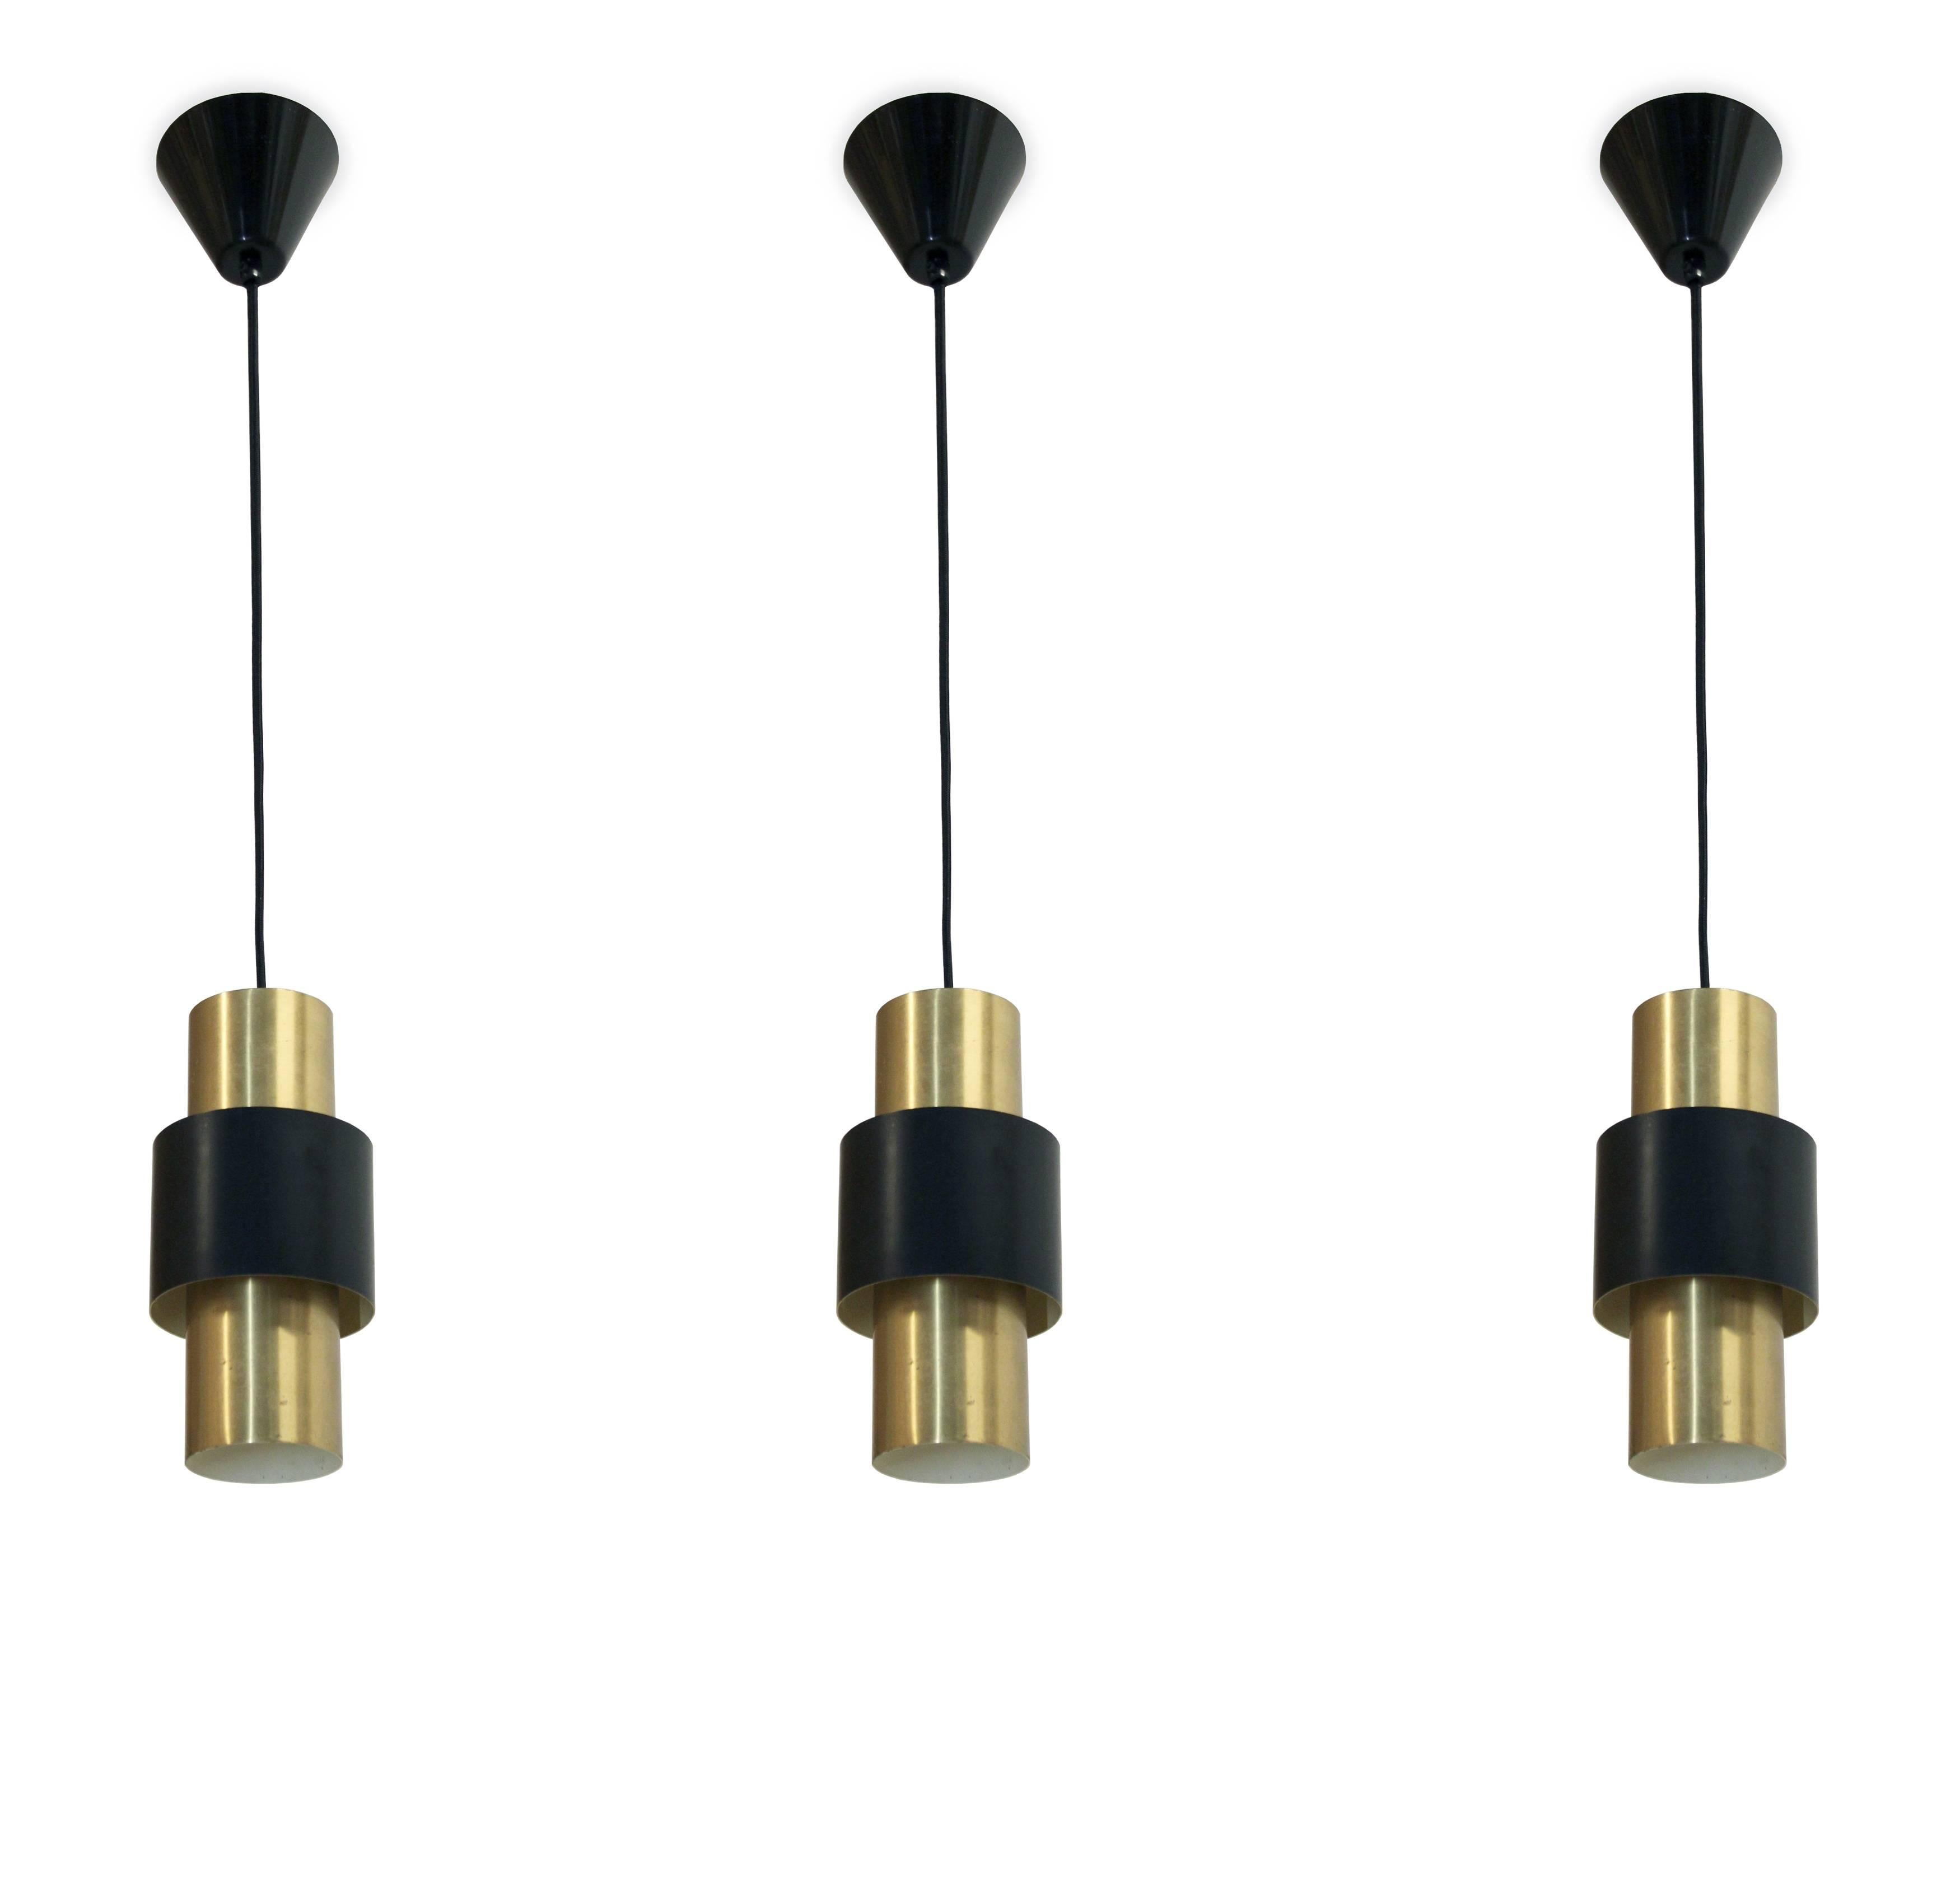 Beautiful set of three ceiling pendants in brass and painted steel. Designed by Jo Hammerborg and made in Denmark by Fog & Mørup from circa 1960s first half. All lamps are fully working and in good vintage condition.